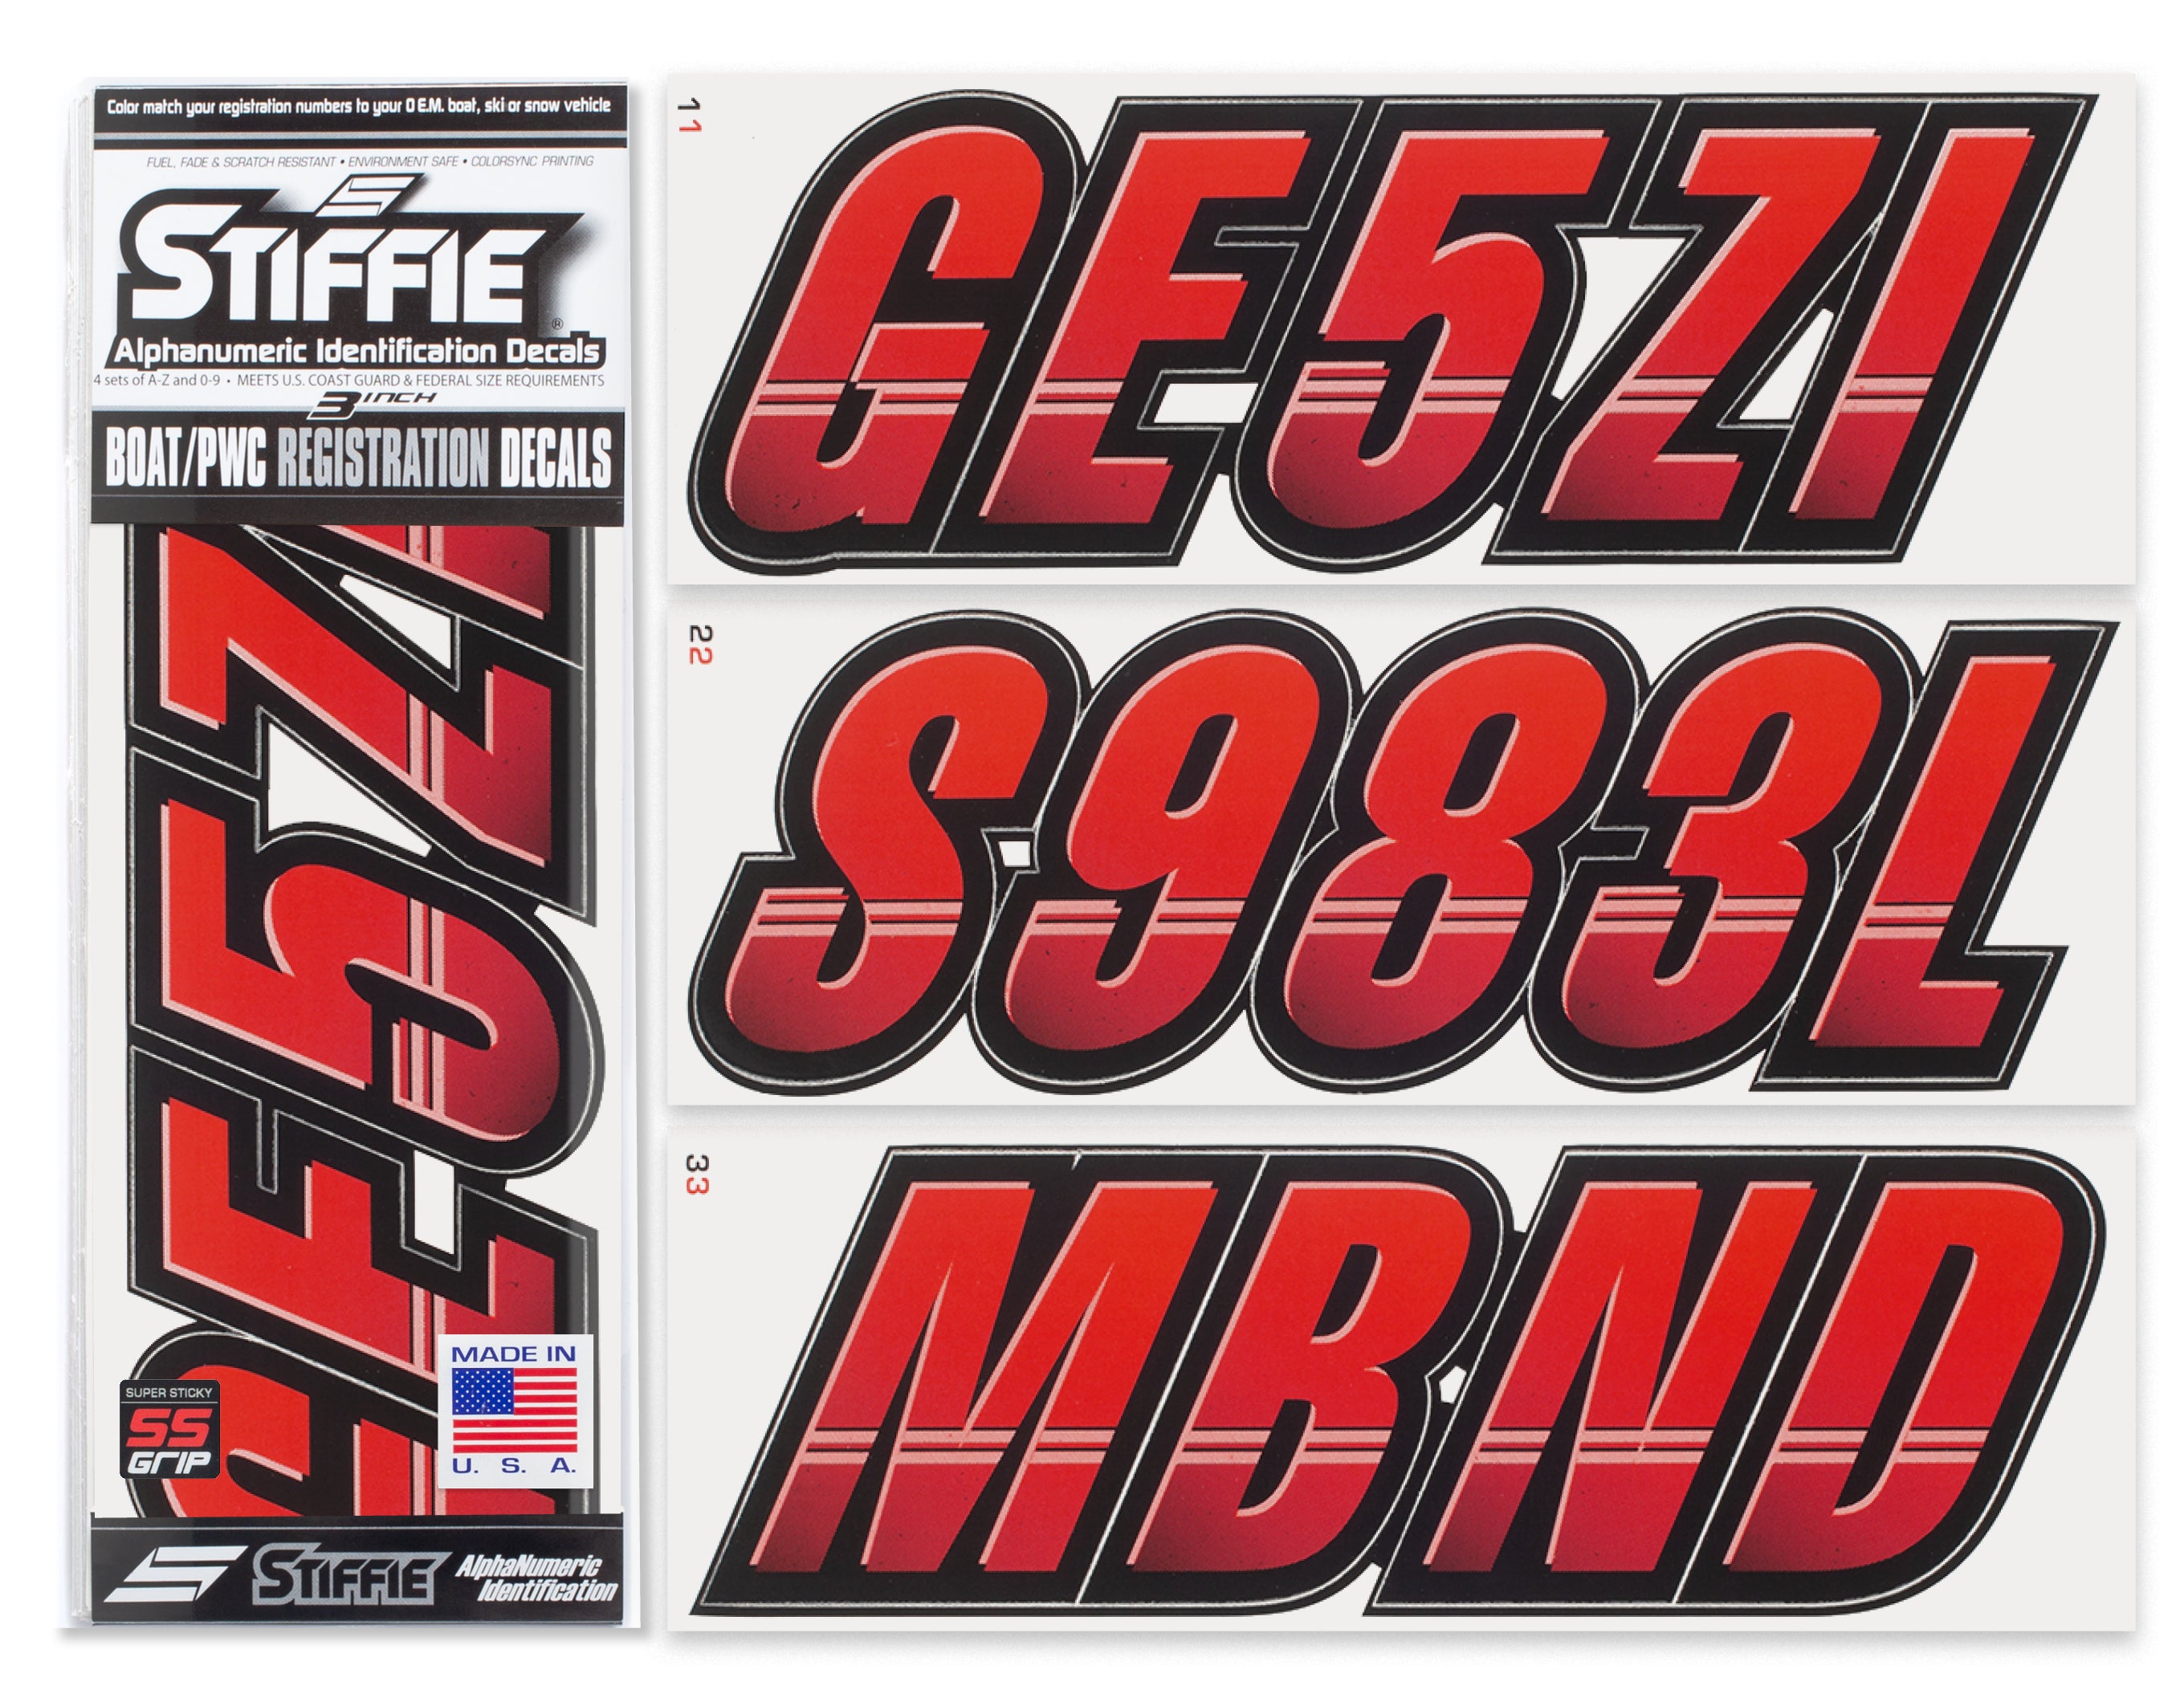 Stiffie Techtron Lava/Black Super Sticky 3" Alpha Numeric Registration Identification Numbers Stickers Decals for Sea-Doo Spark, Inflatable Boats, Ribs, Hypalon/PVC, PWC and Boats